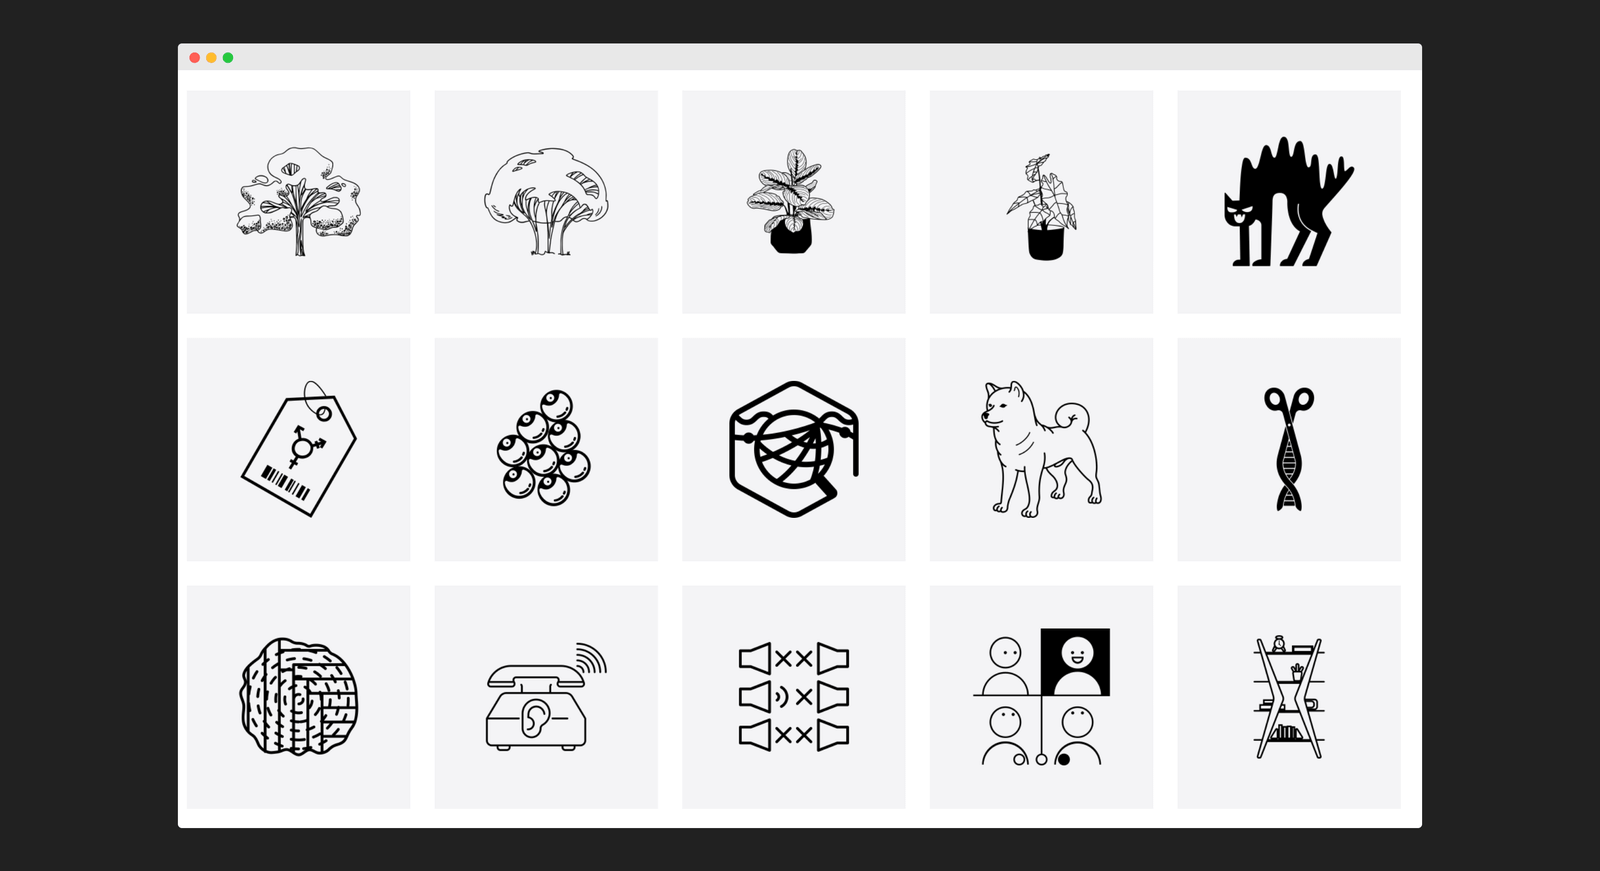 Using a professional icon and illustration set can add consistency to your design